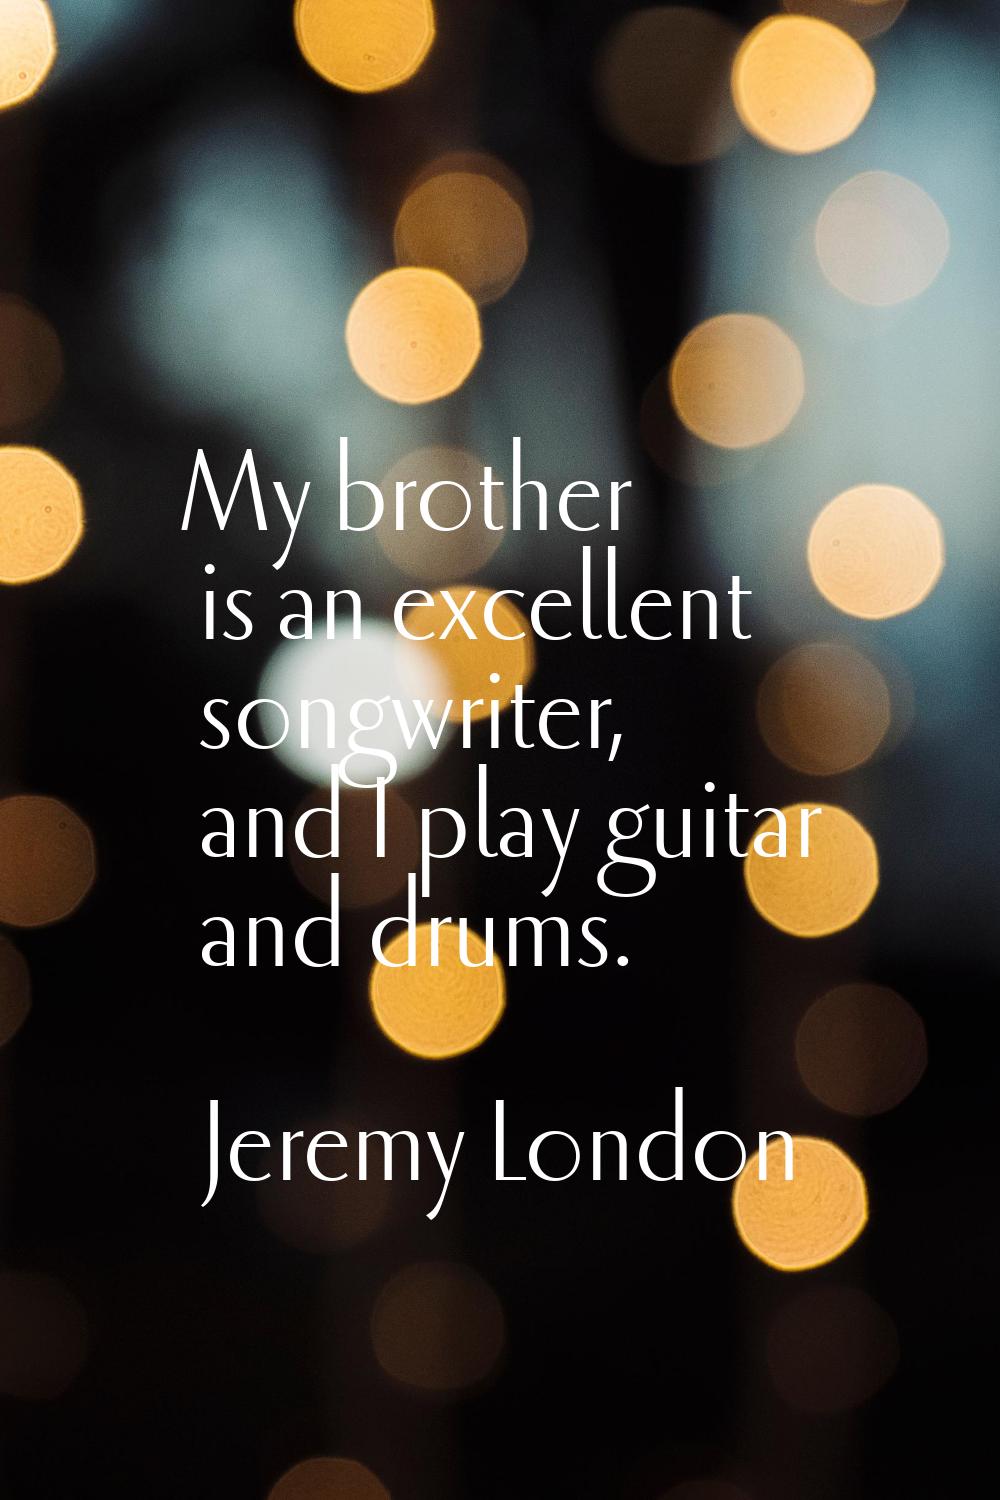 My brother is an excellent songwriter, and I play guitar and drums.